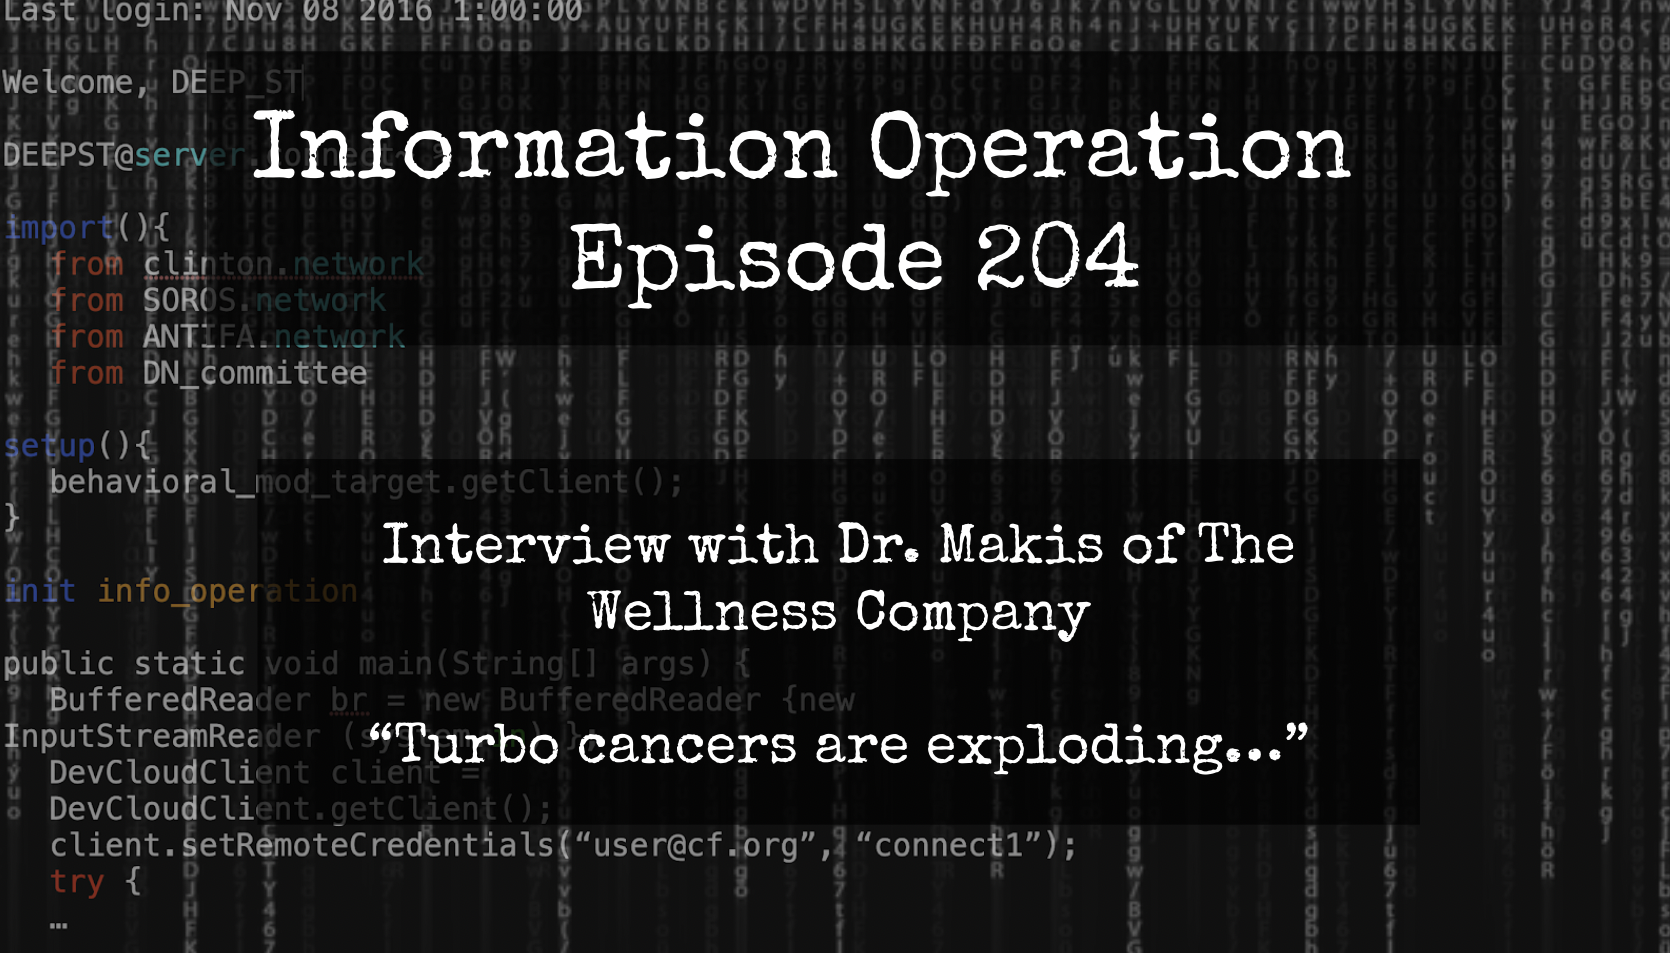 LIVE 7pm EST: IO Episode 204: Dr Makis - Turbo Cancers Are Exploding